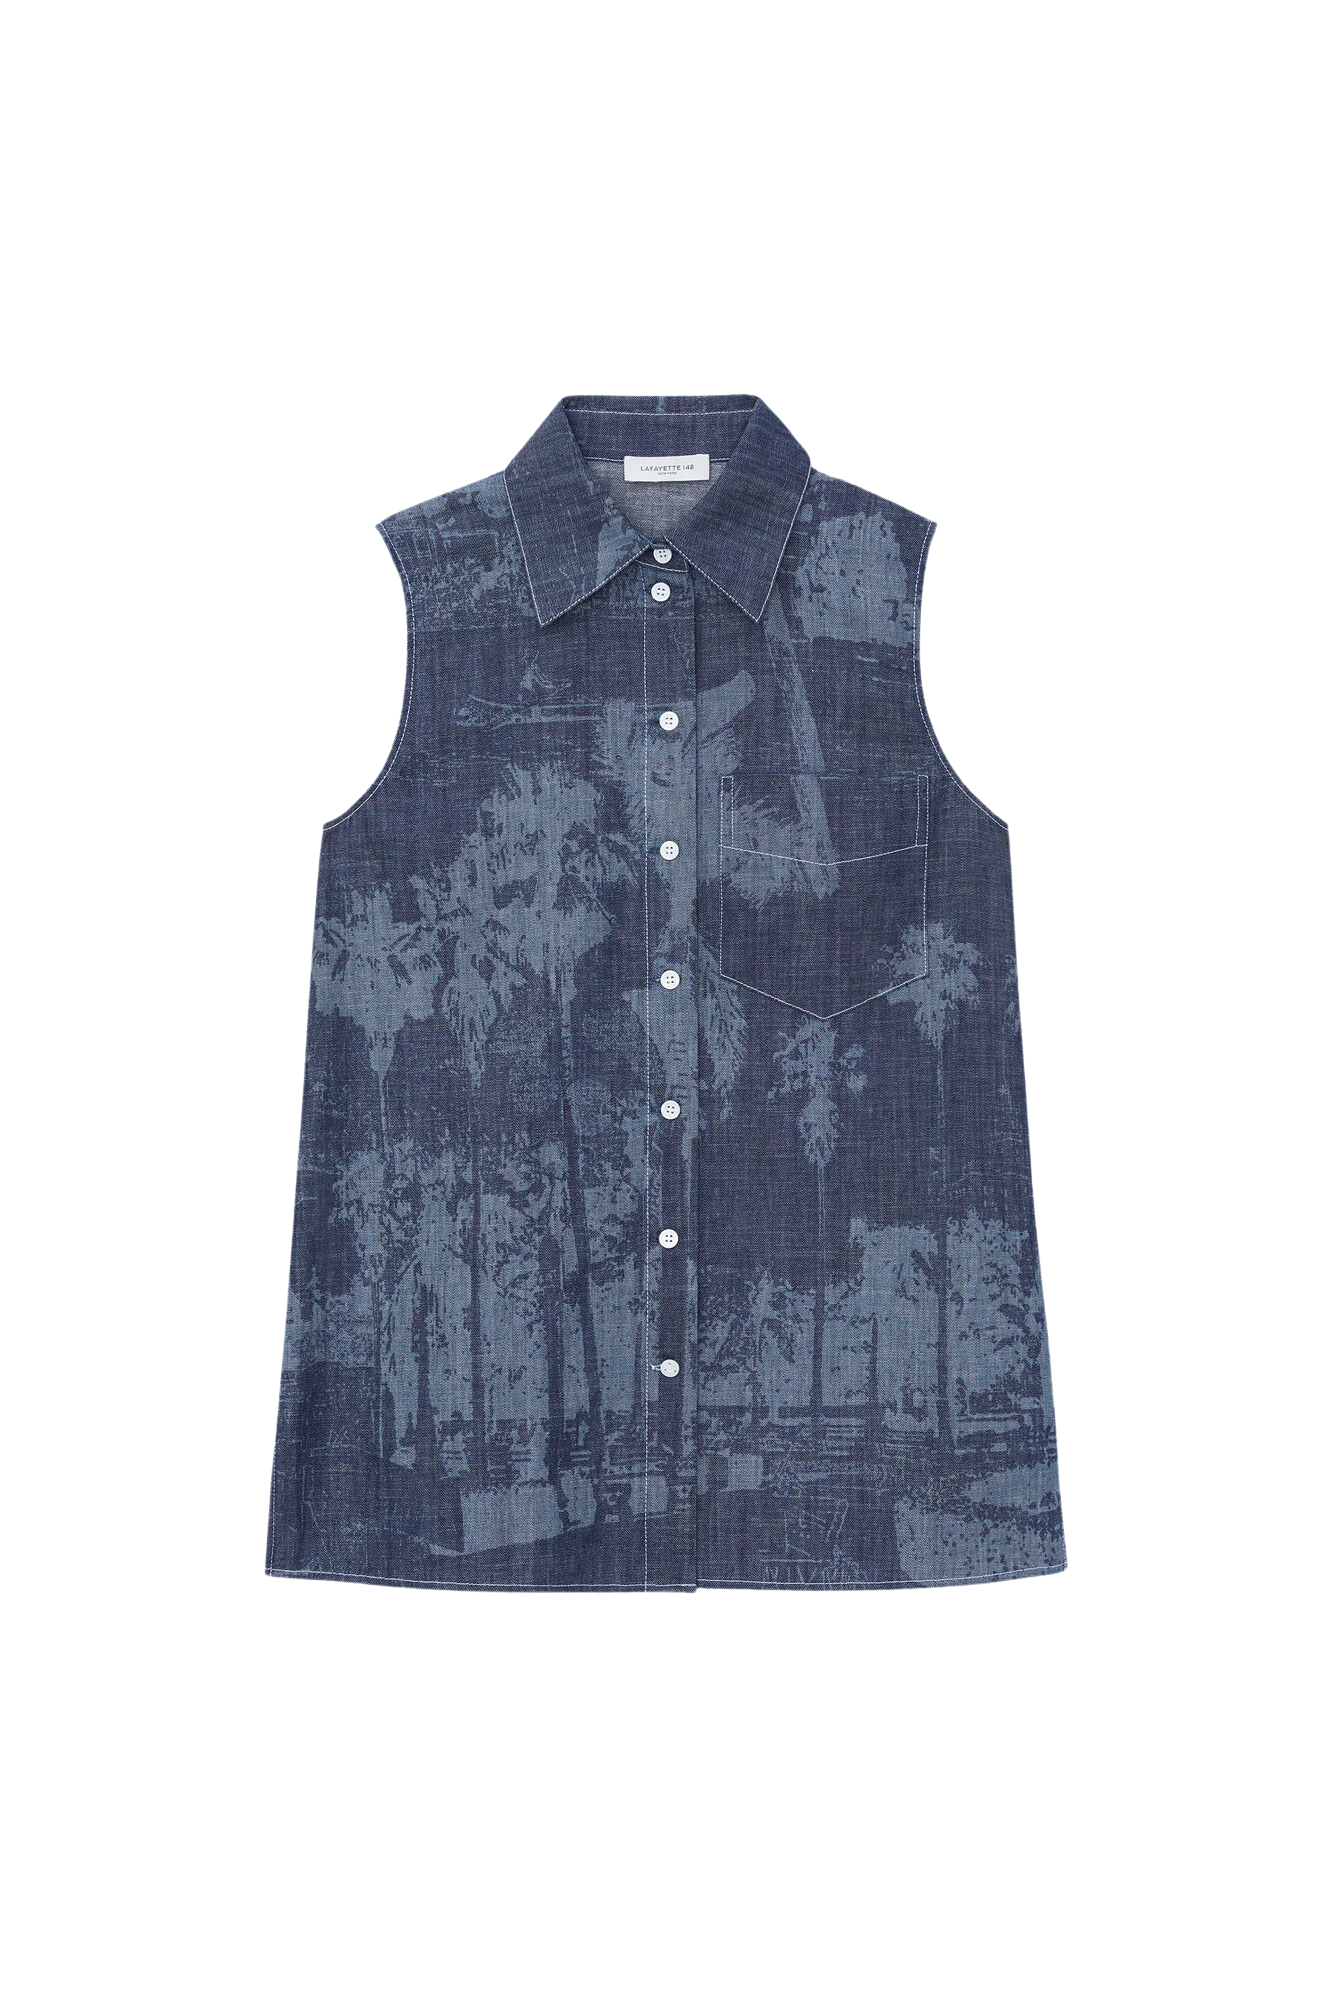 This season's Sleeveless Button Front Shirt from Lafayette 148 is crafted with premium Italian chambray, 